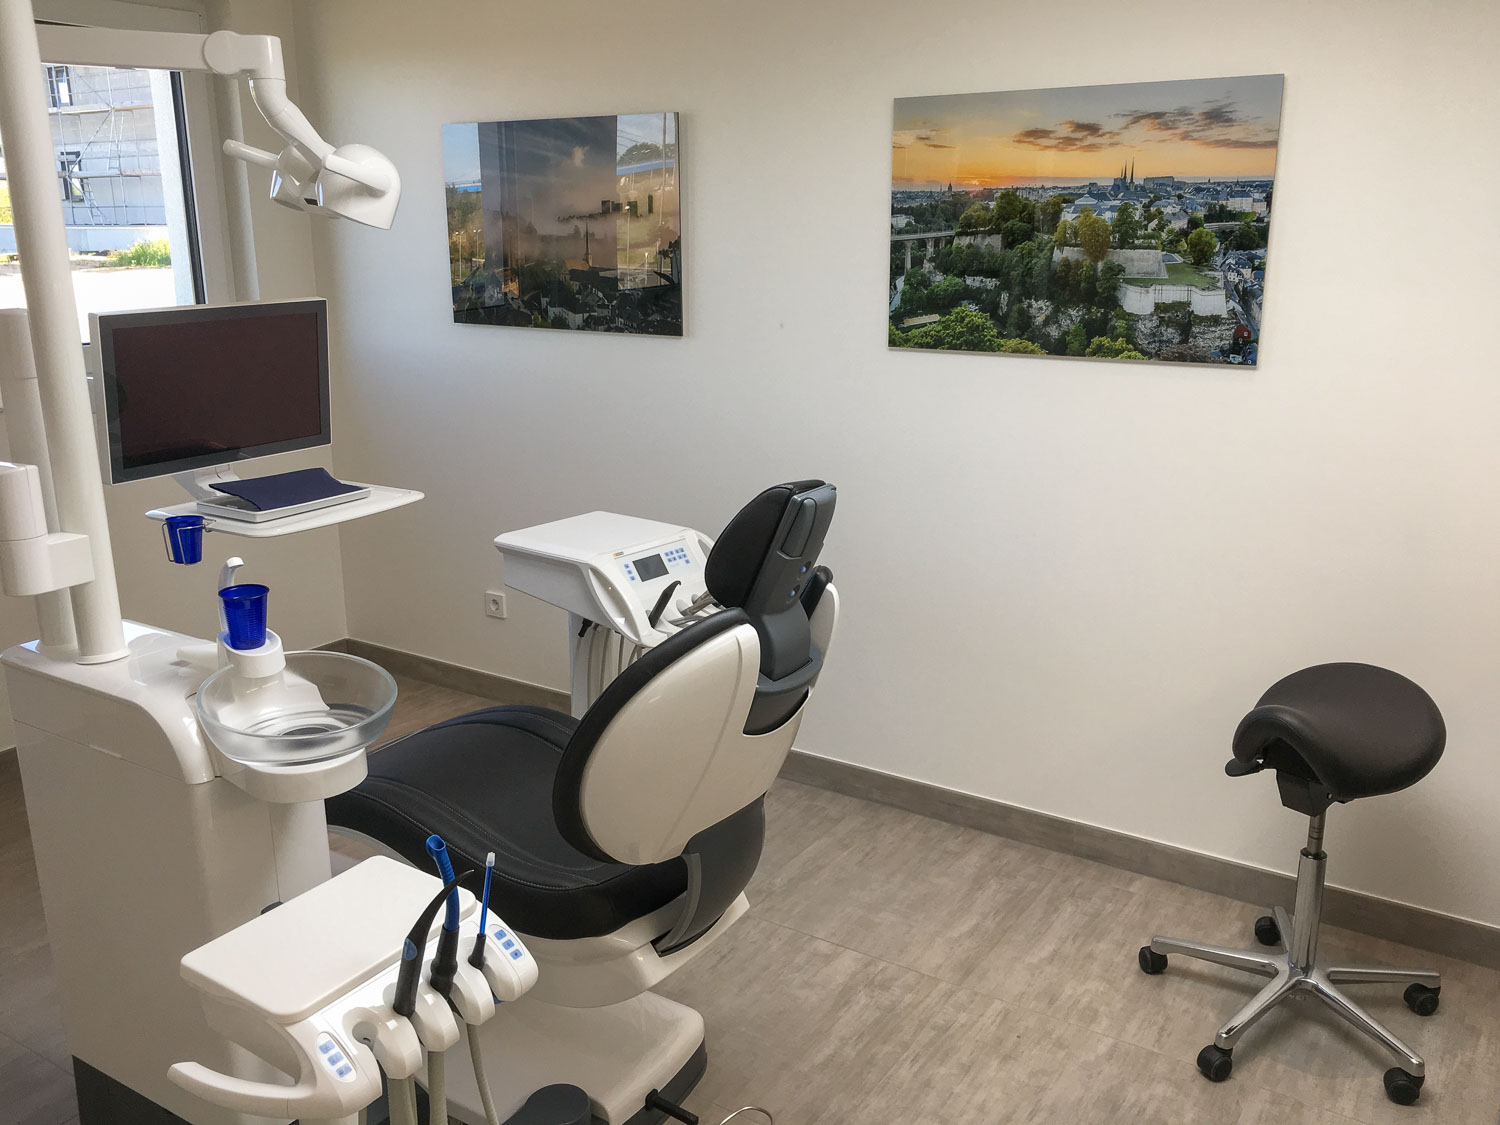 Exhibition at the Klemmer and Benabadji Dental Practice in Mamer - Photography by Christophe Van Biesen - Landscape and Travel Photographer from Luxembourg